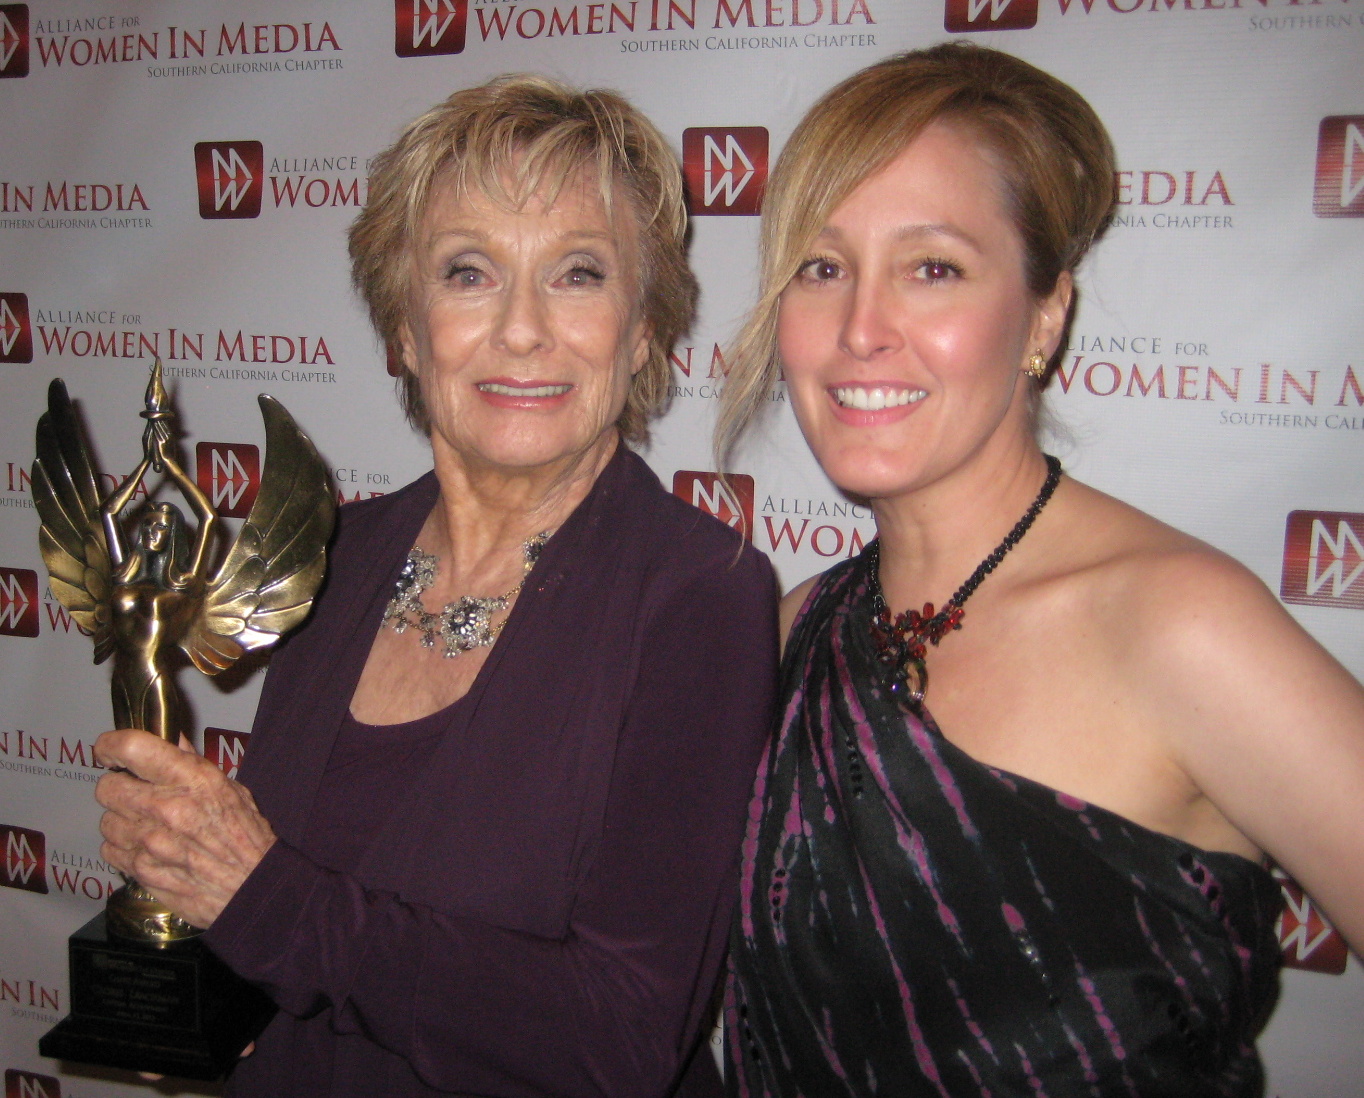 Cloris Leachman is proud of her Lifetime Achievement Genii Award. She so deserves this honor!!!